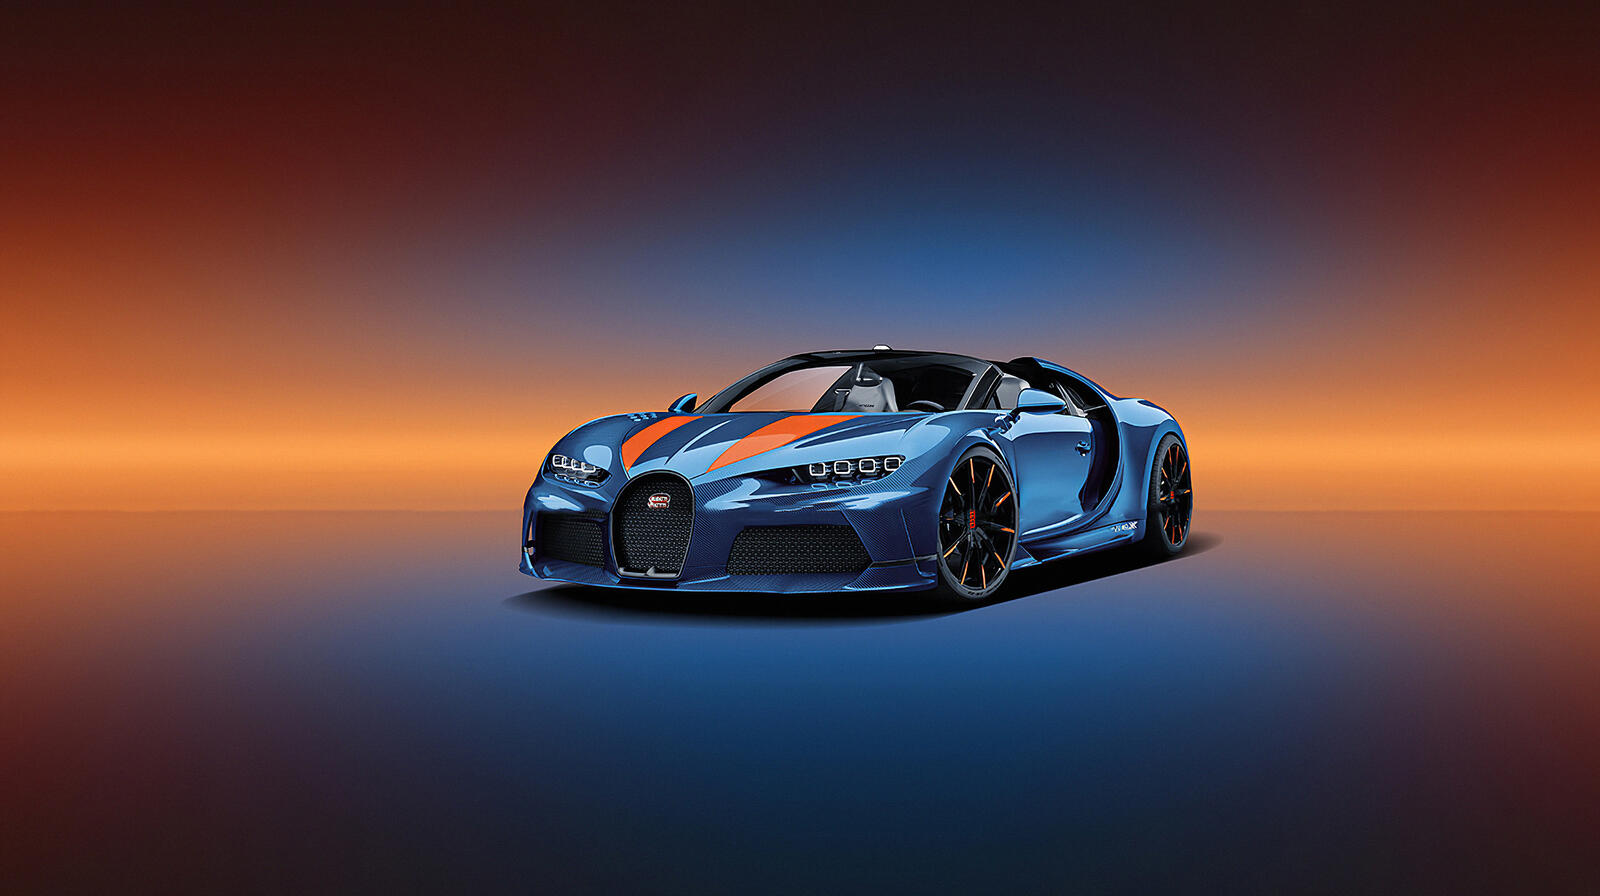 Wallpapers Bugatti Chiron cars view from front on the desktop